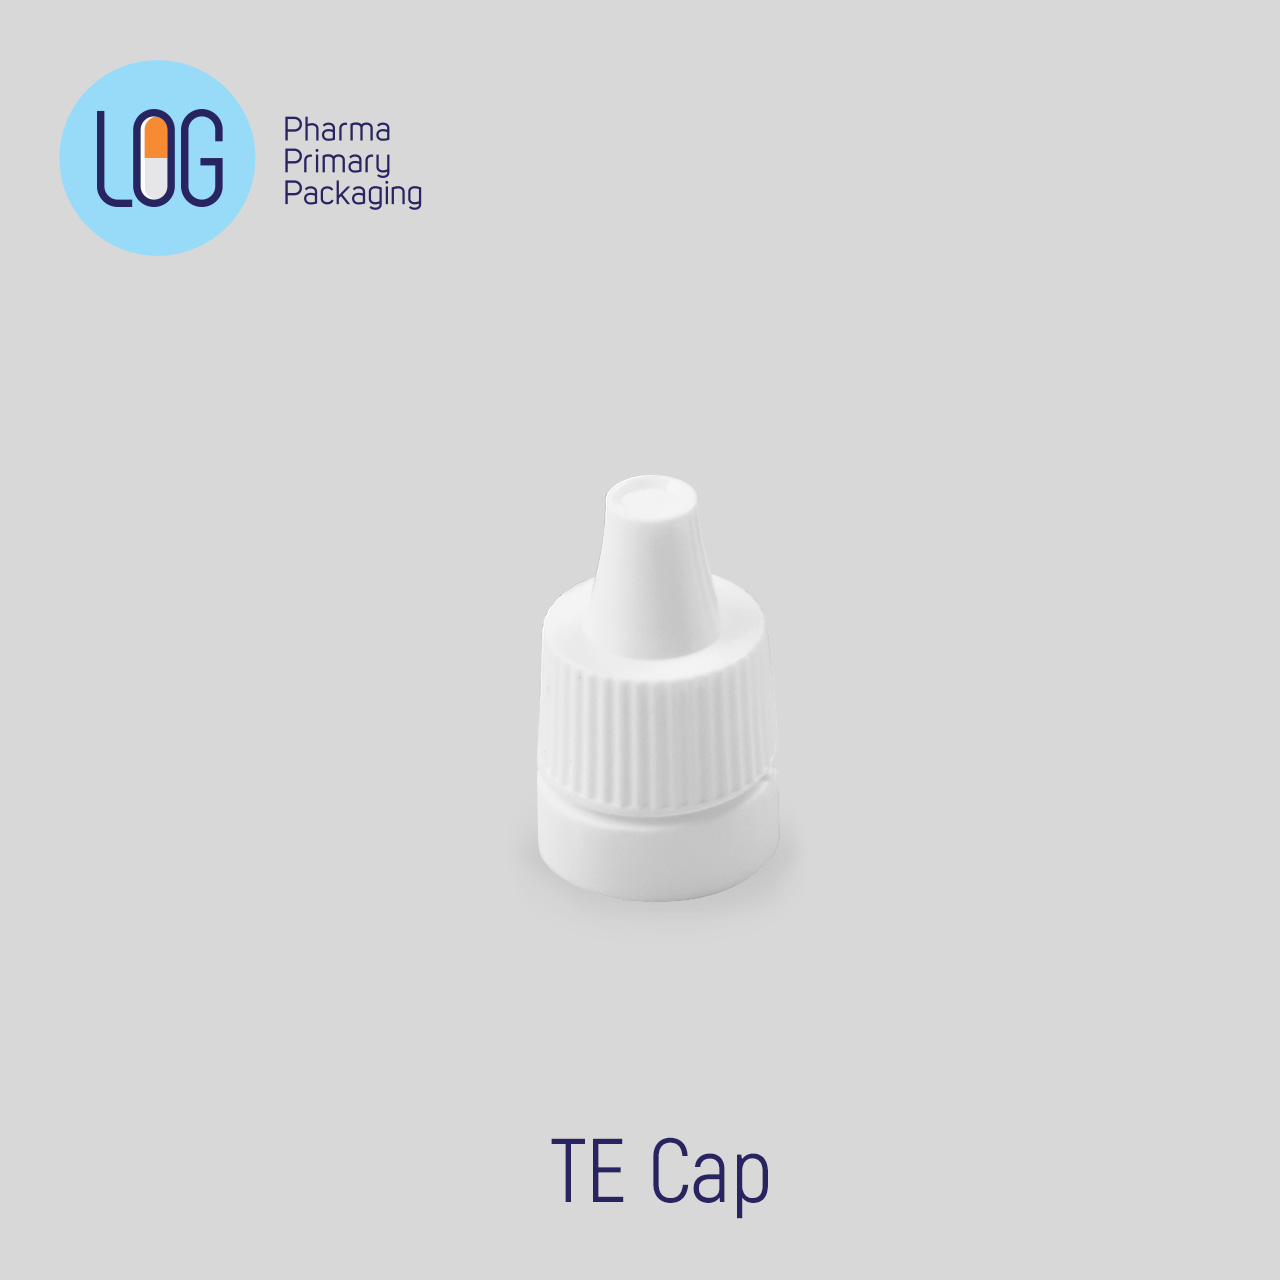 14mm Conic Dropper Tip Cap with Tamper Evident (TE) Ring